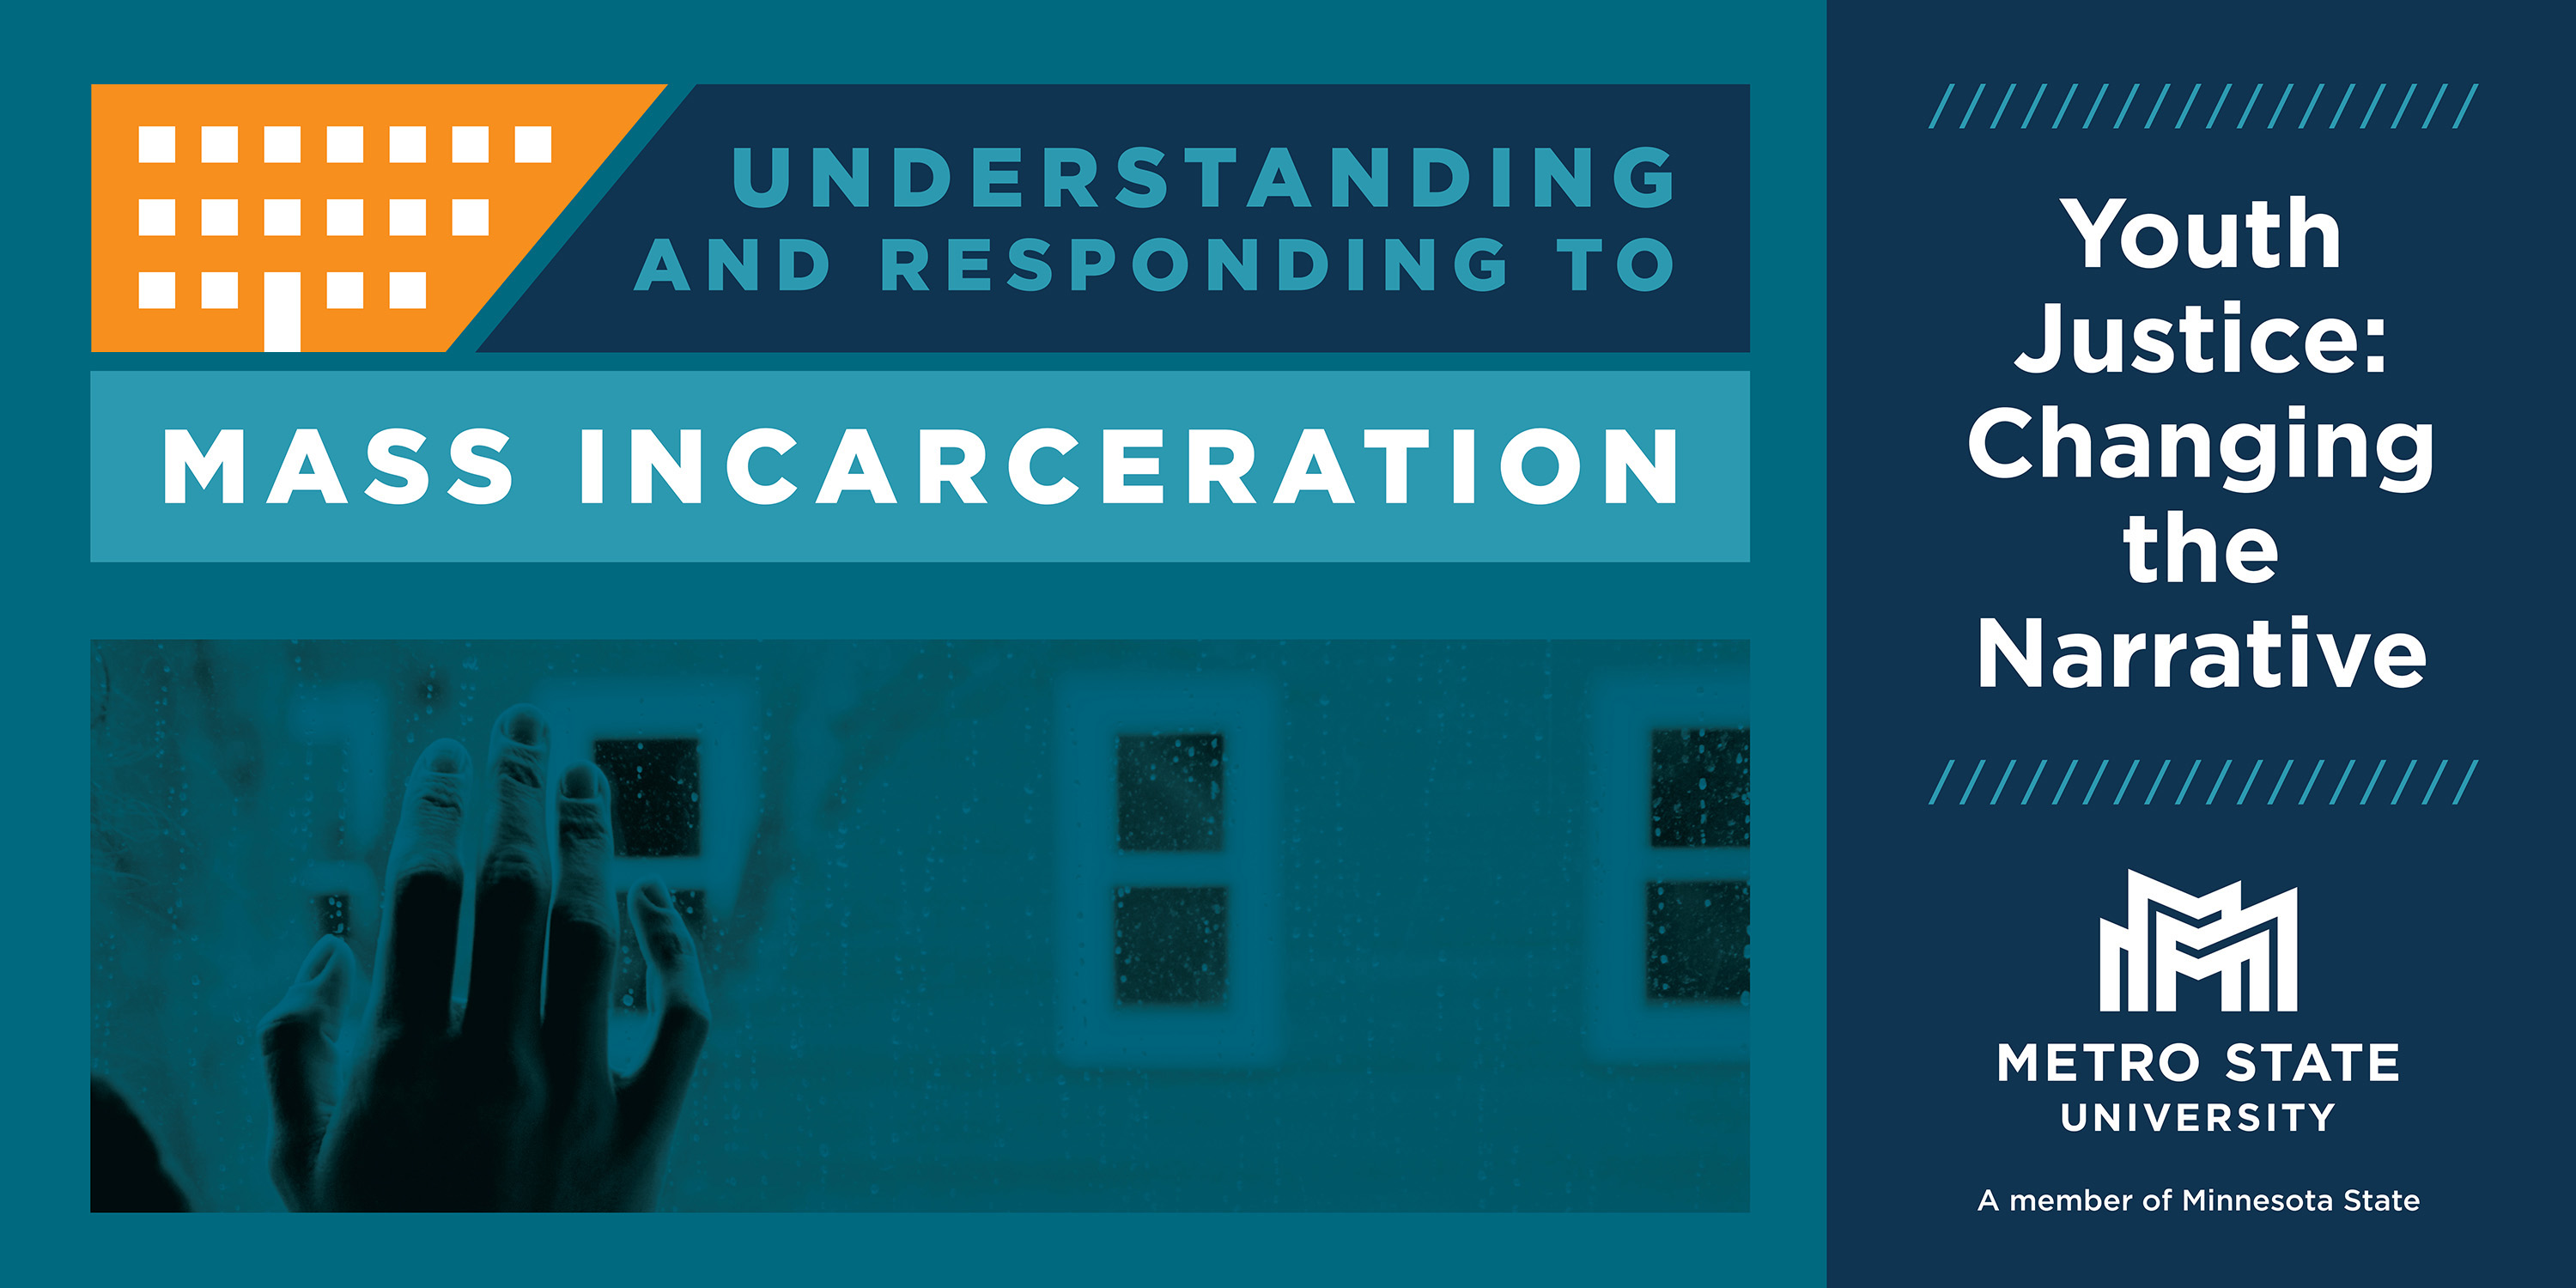 Understanding and responding to mass incarceration, youth Justice: changing the narrative, presented by Metro State University, a member of Minnesota State